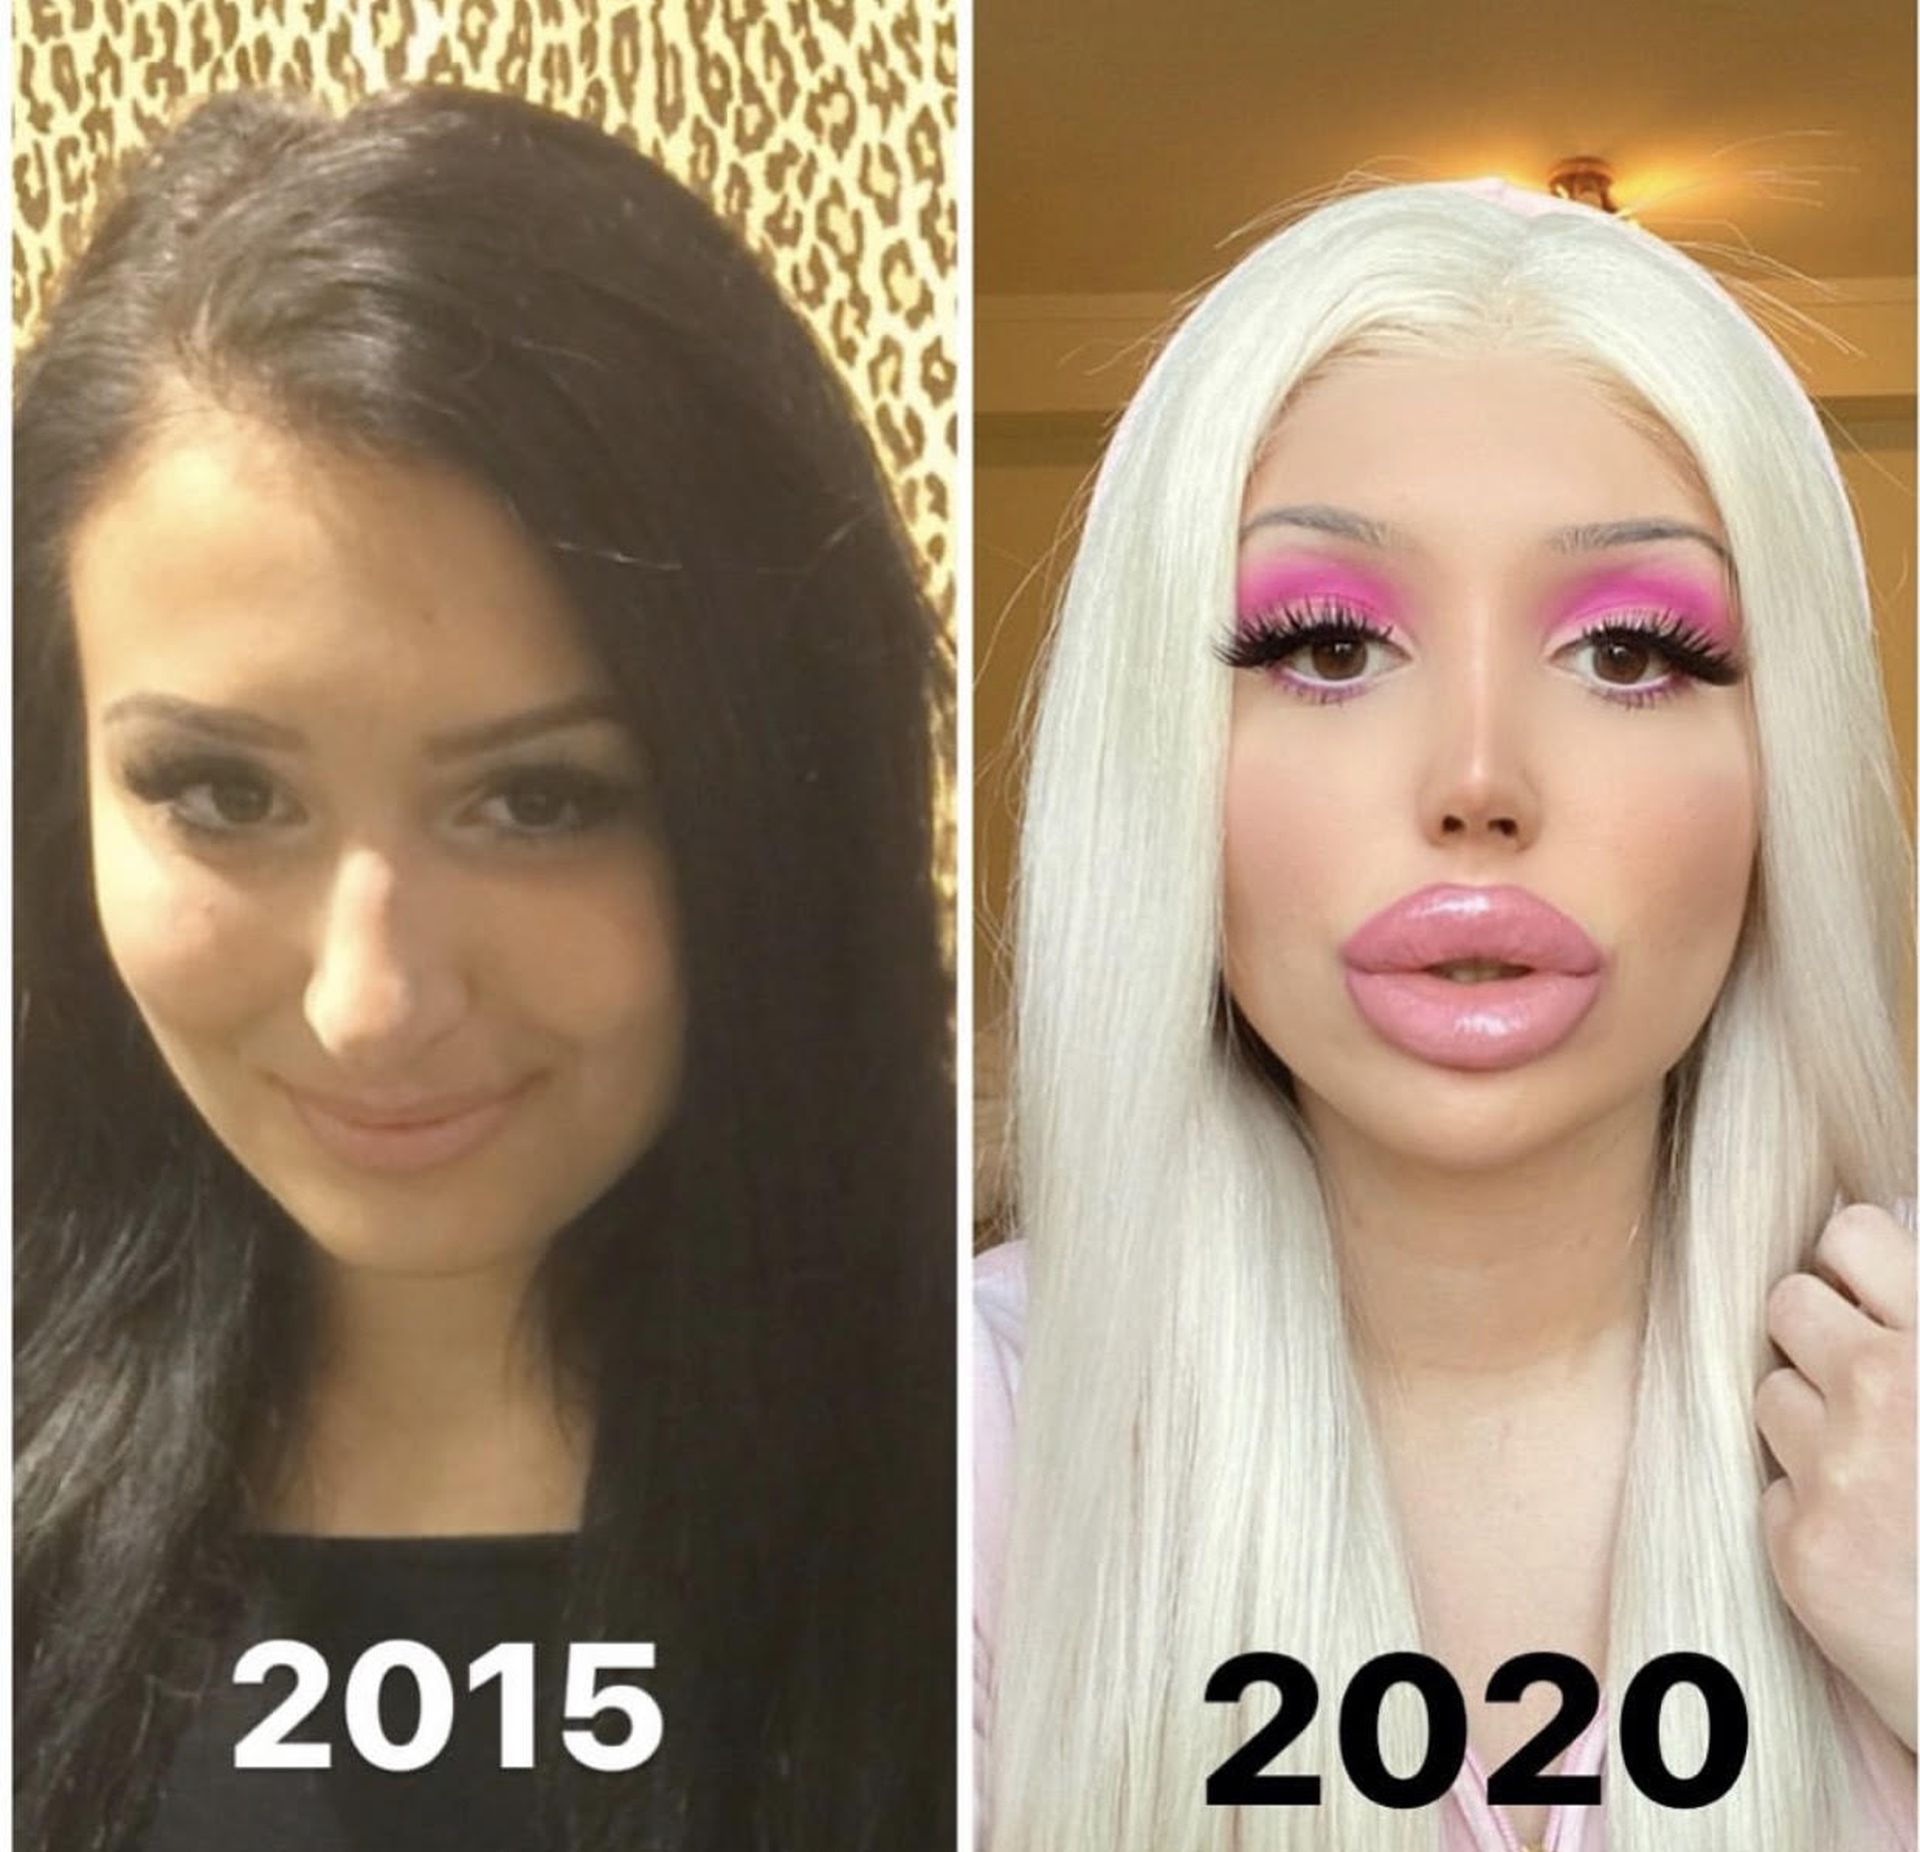 Steffi Mulic Refuses to Let a Pandemic Delay Her Becoming a Real-Life Bratz Doll (12 Photos)